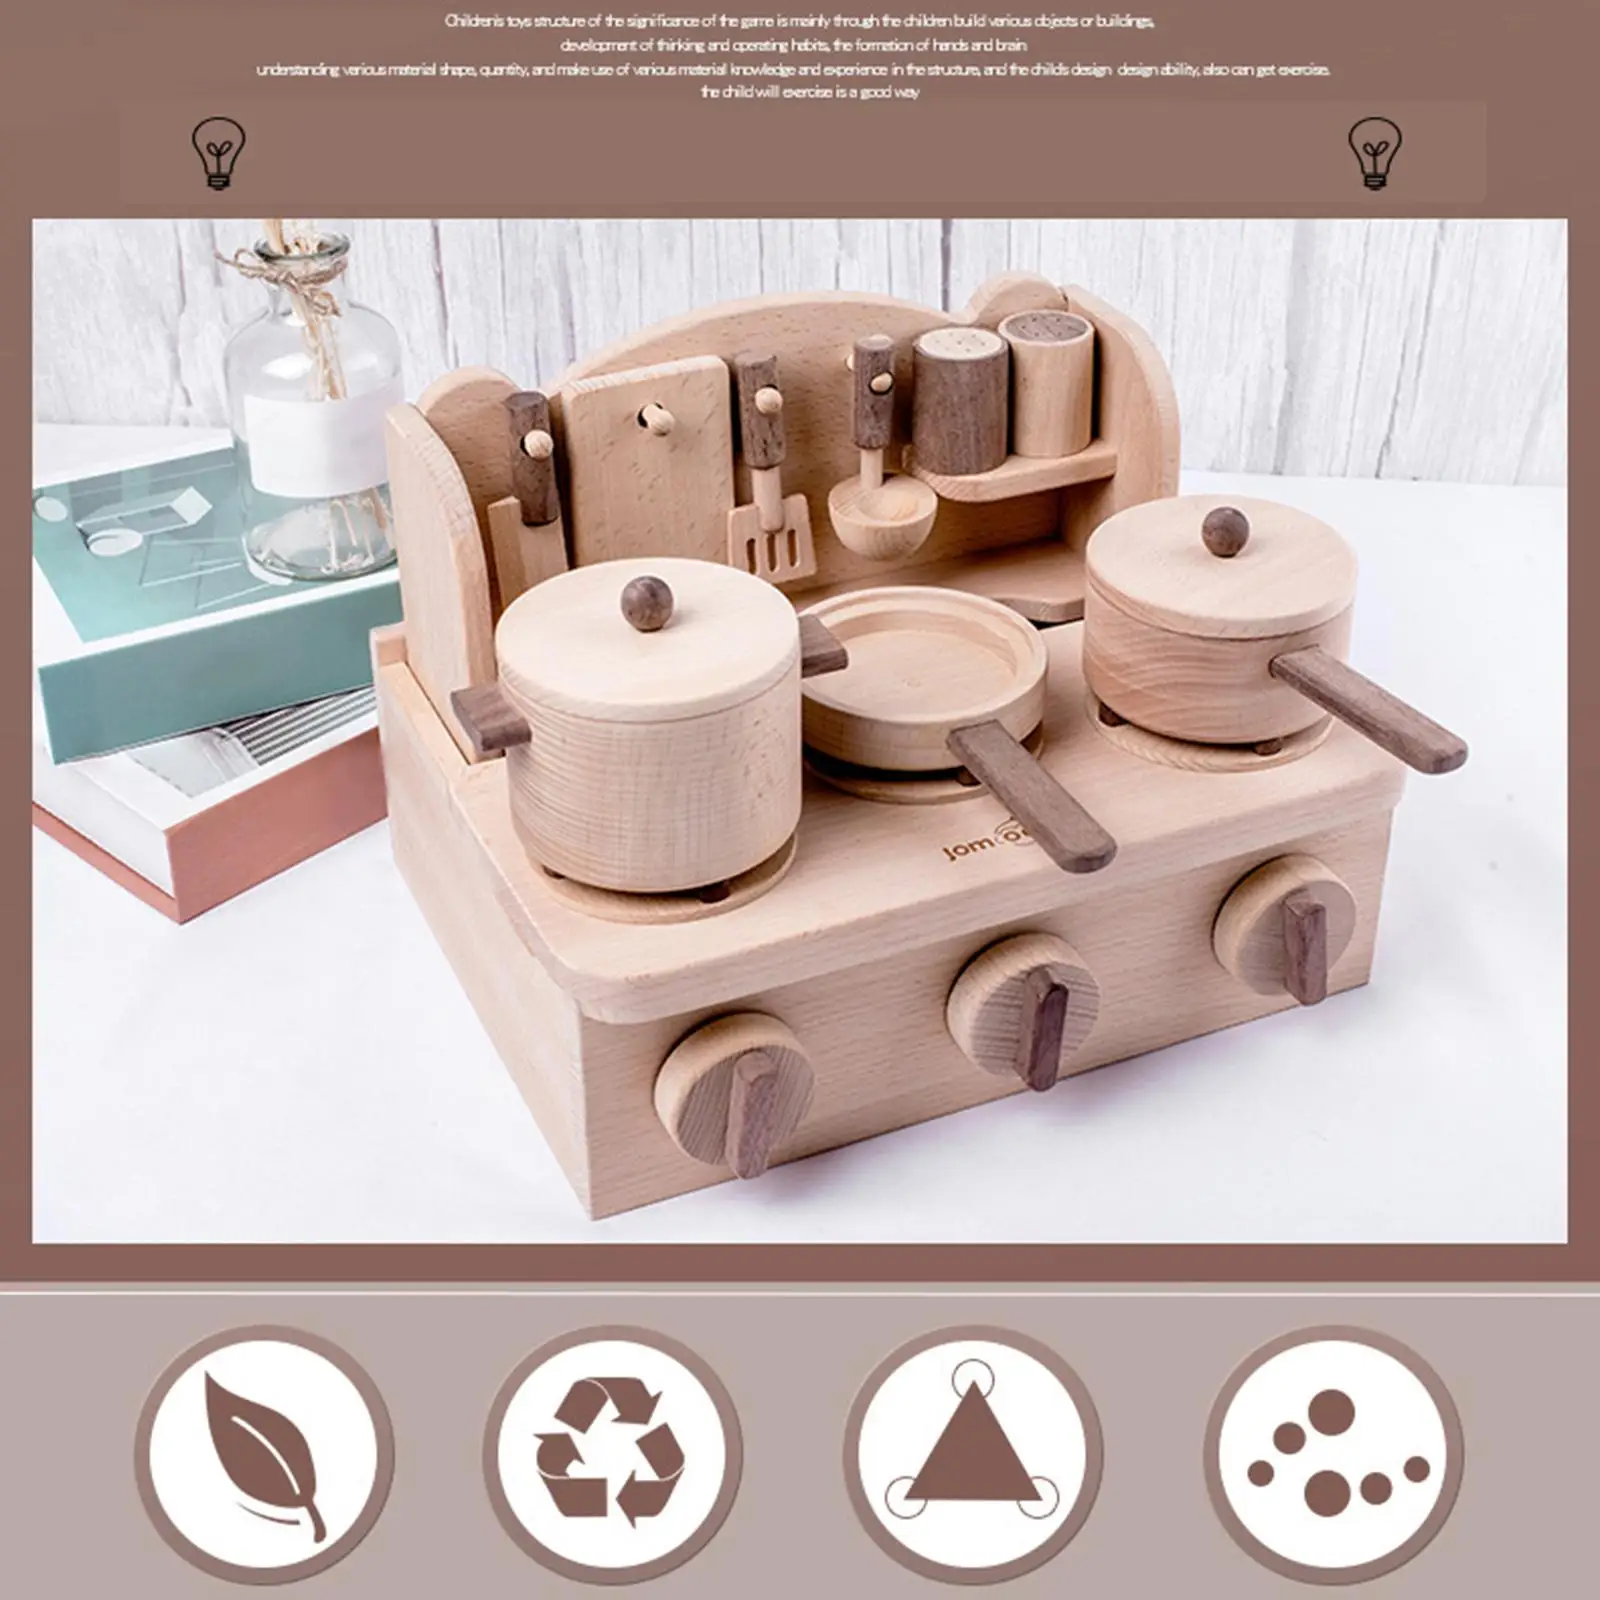 Wooden Pretend Kitchen Playset Realistic Setup Simulation Cooking Kitchen Play Toy Set for Ages 3+ Girls Boys Children Toddlers